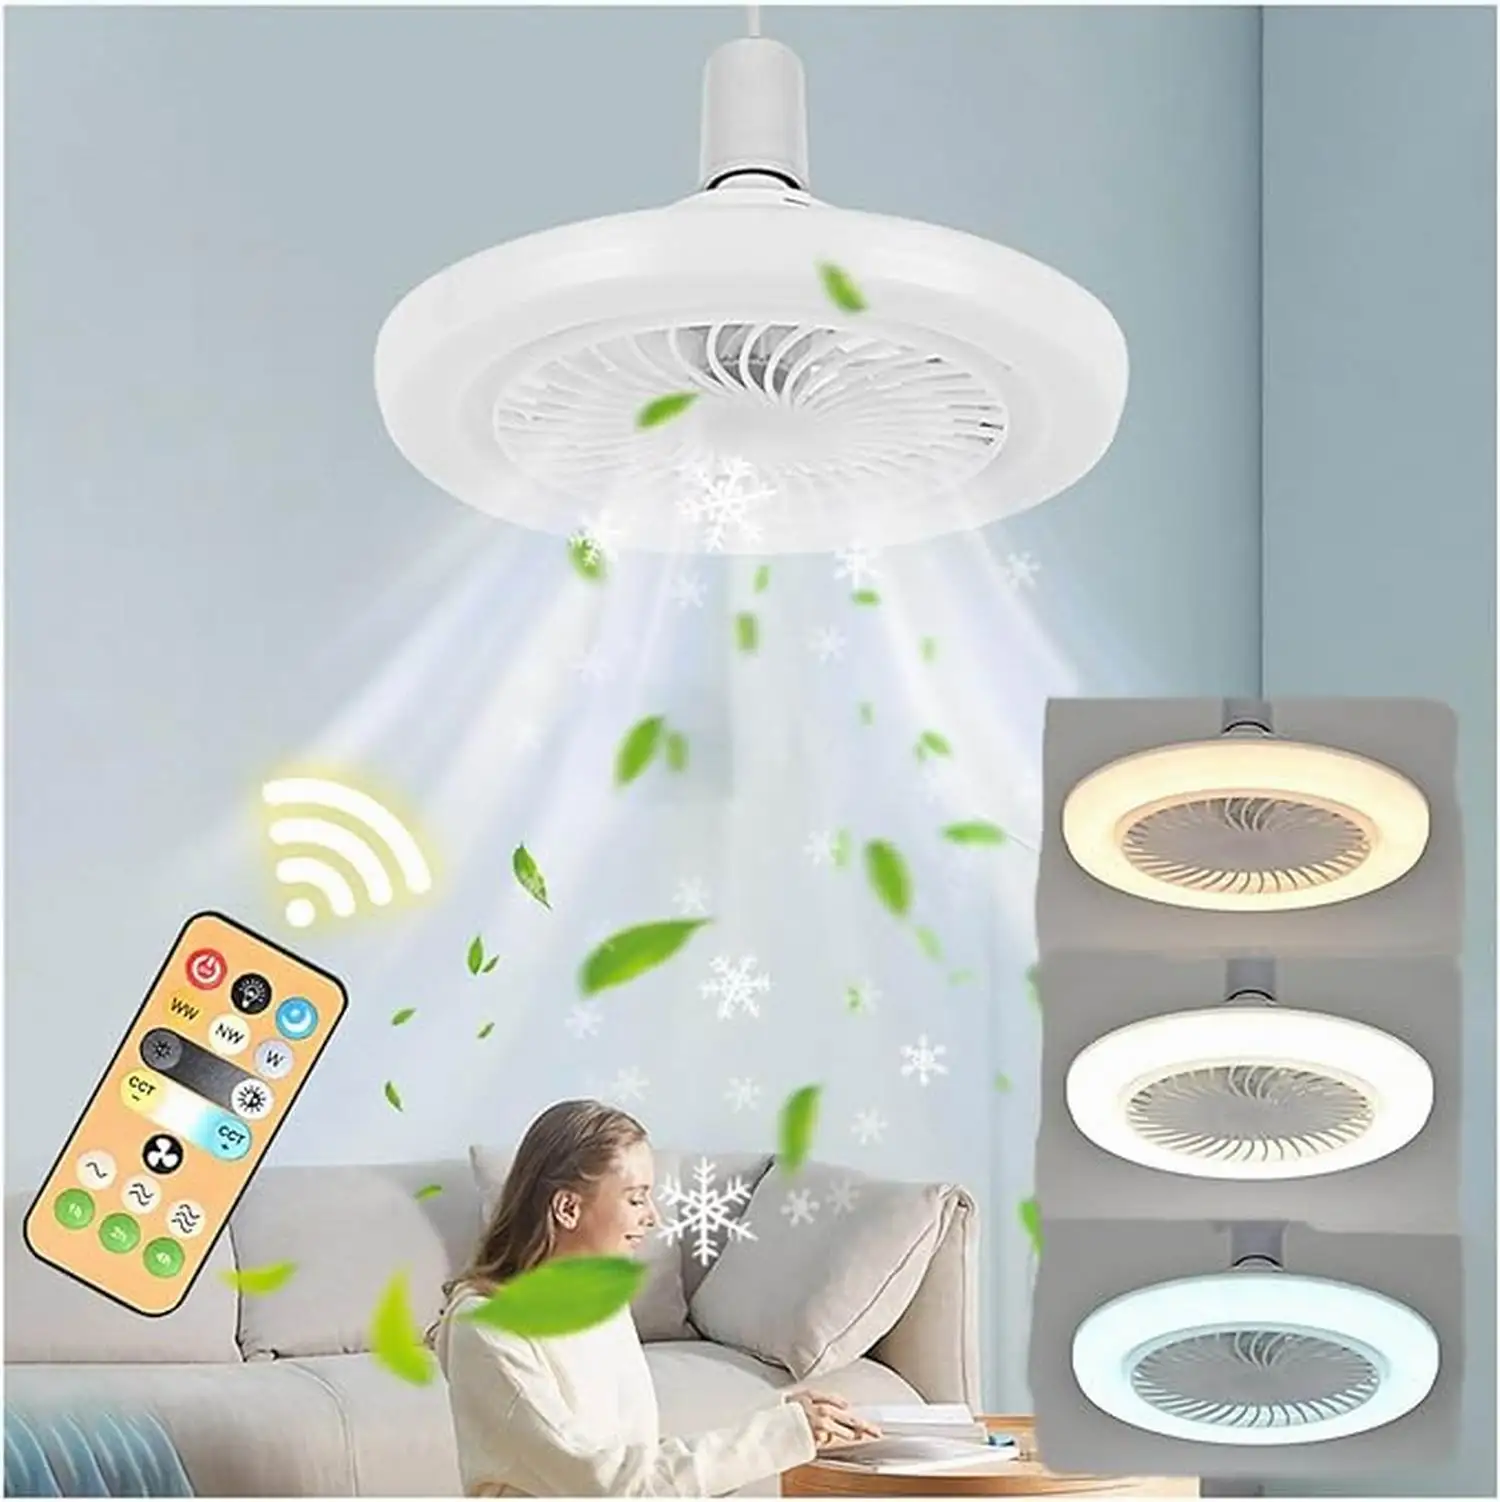 

E27 LED Ceiling Fan Light Home Cooling Fan Three Working Modes Ceiling Fan Lamp Electric Aromatherapy Fan for Home, Office, Tent